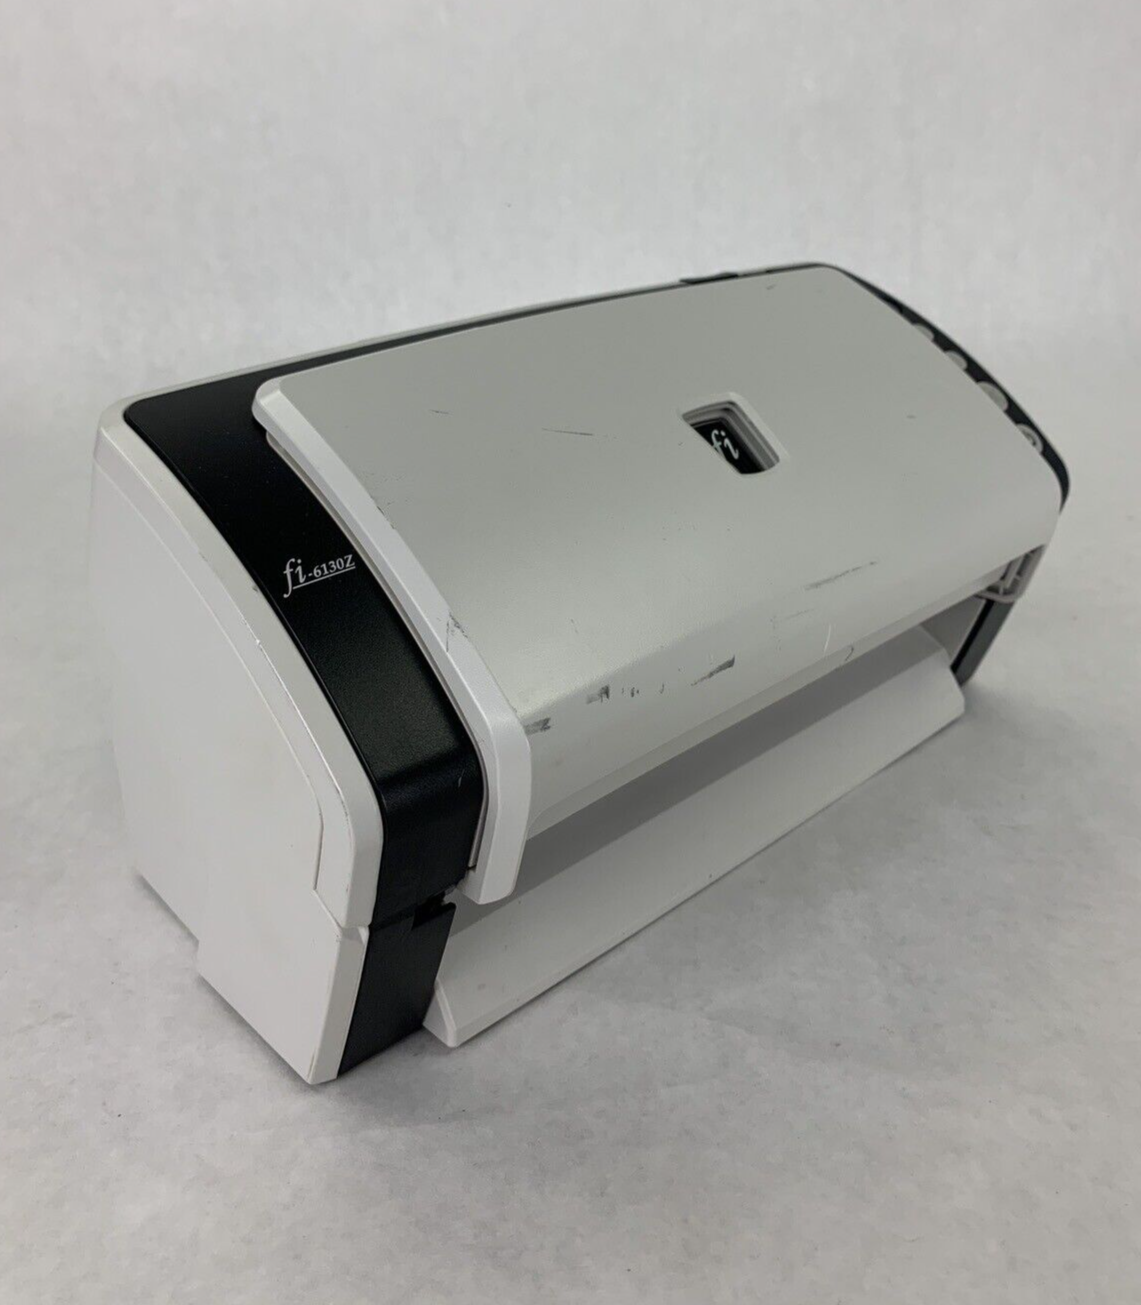 Fujitsu fi-6130z Duplex Color Scanner Tested Missing Document Holder and Catch